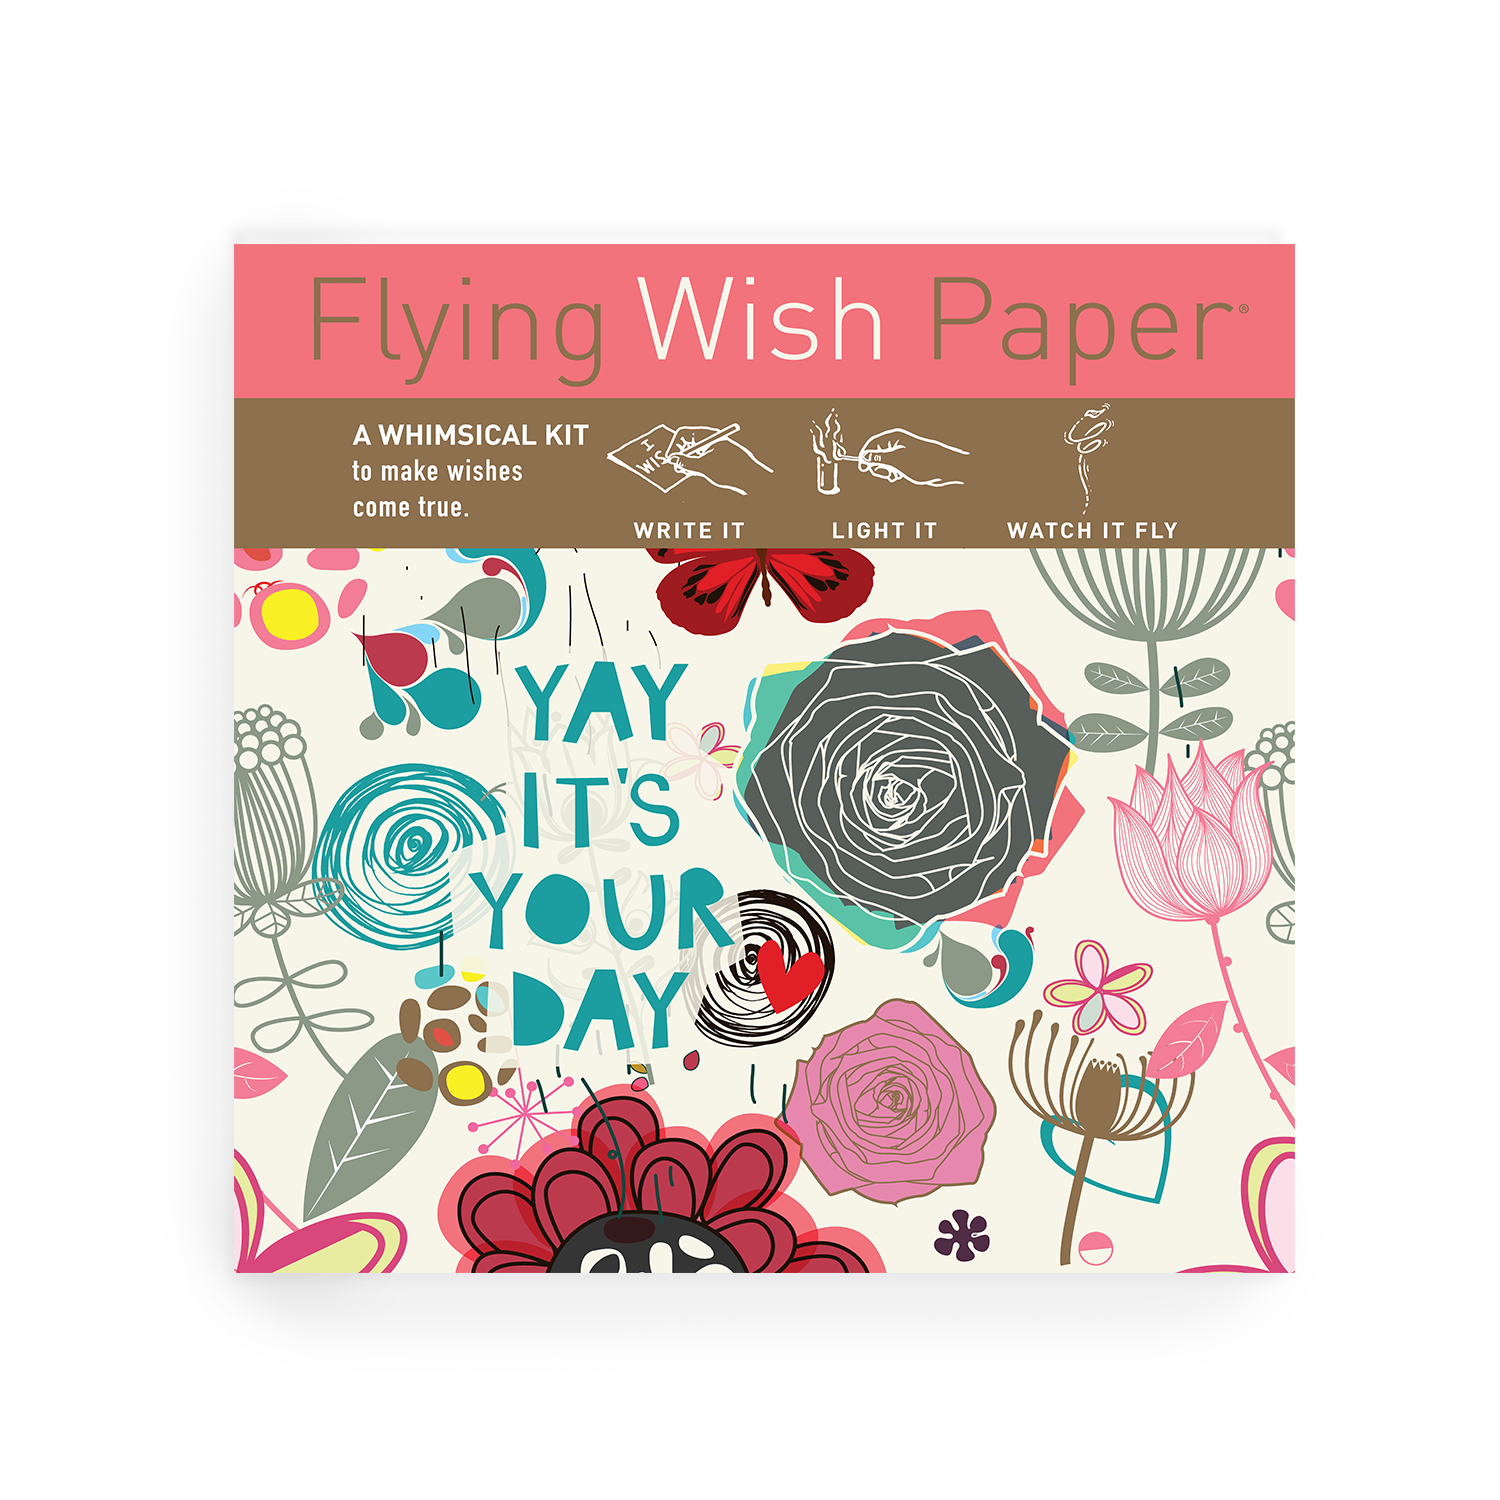 It's Your Day Flying Wish Paper